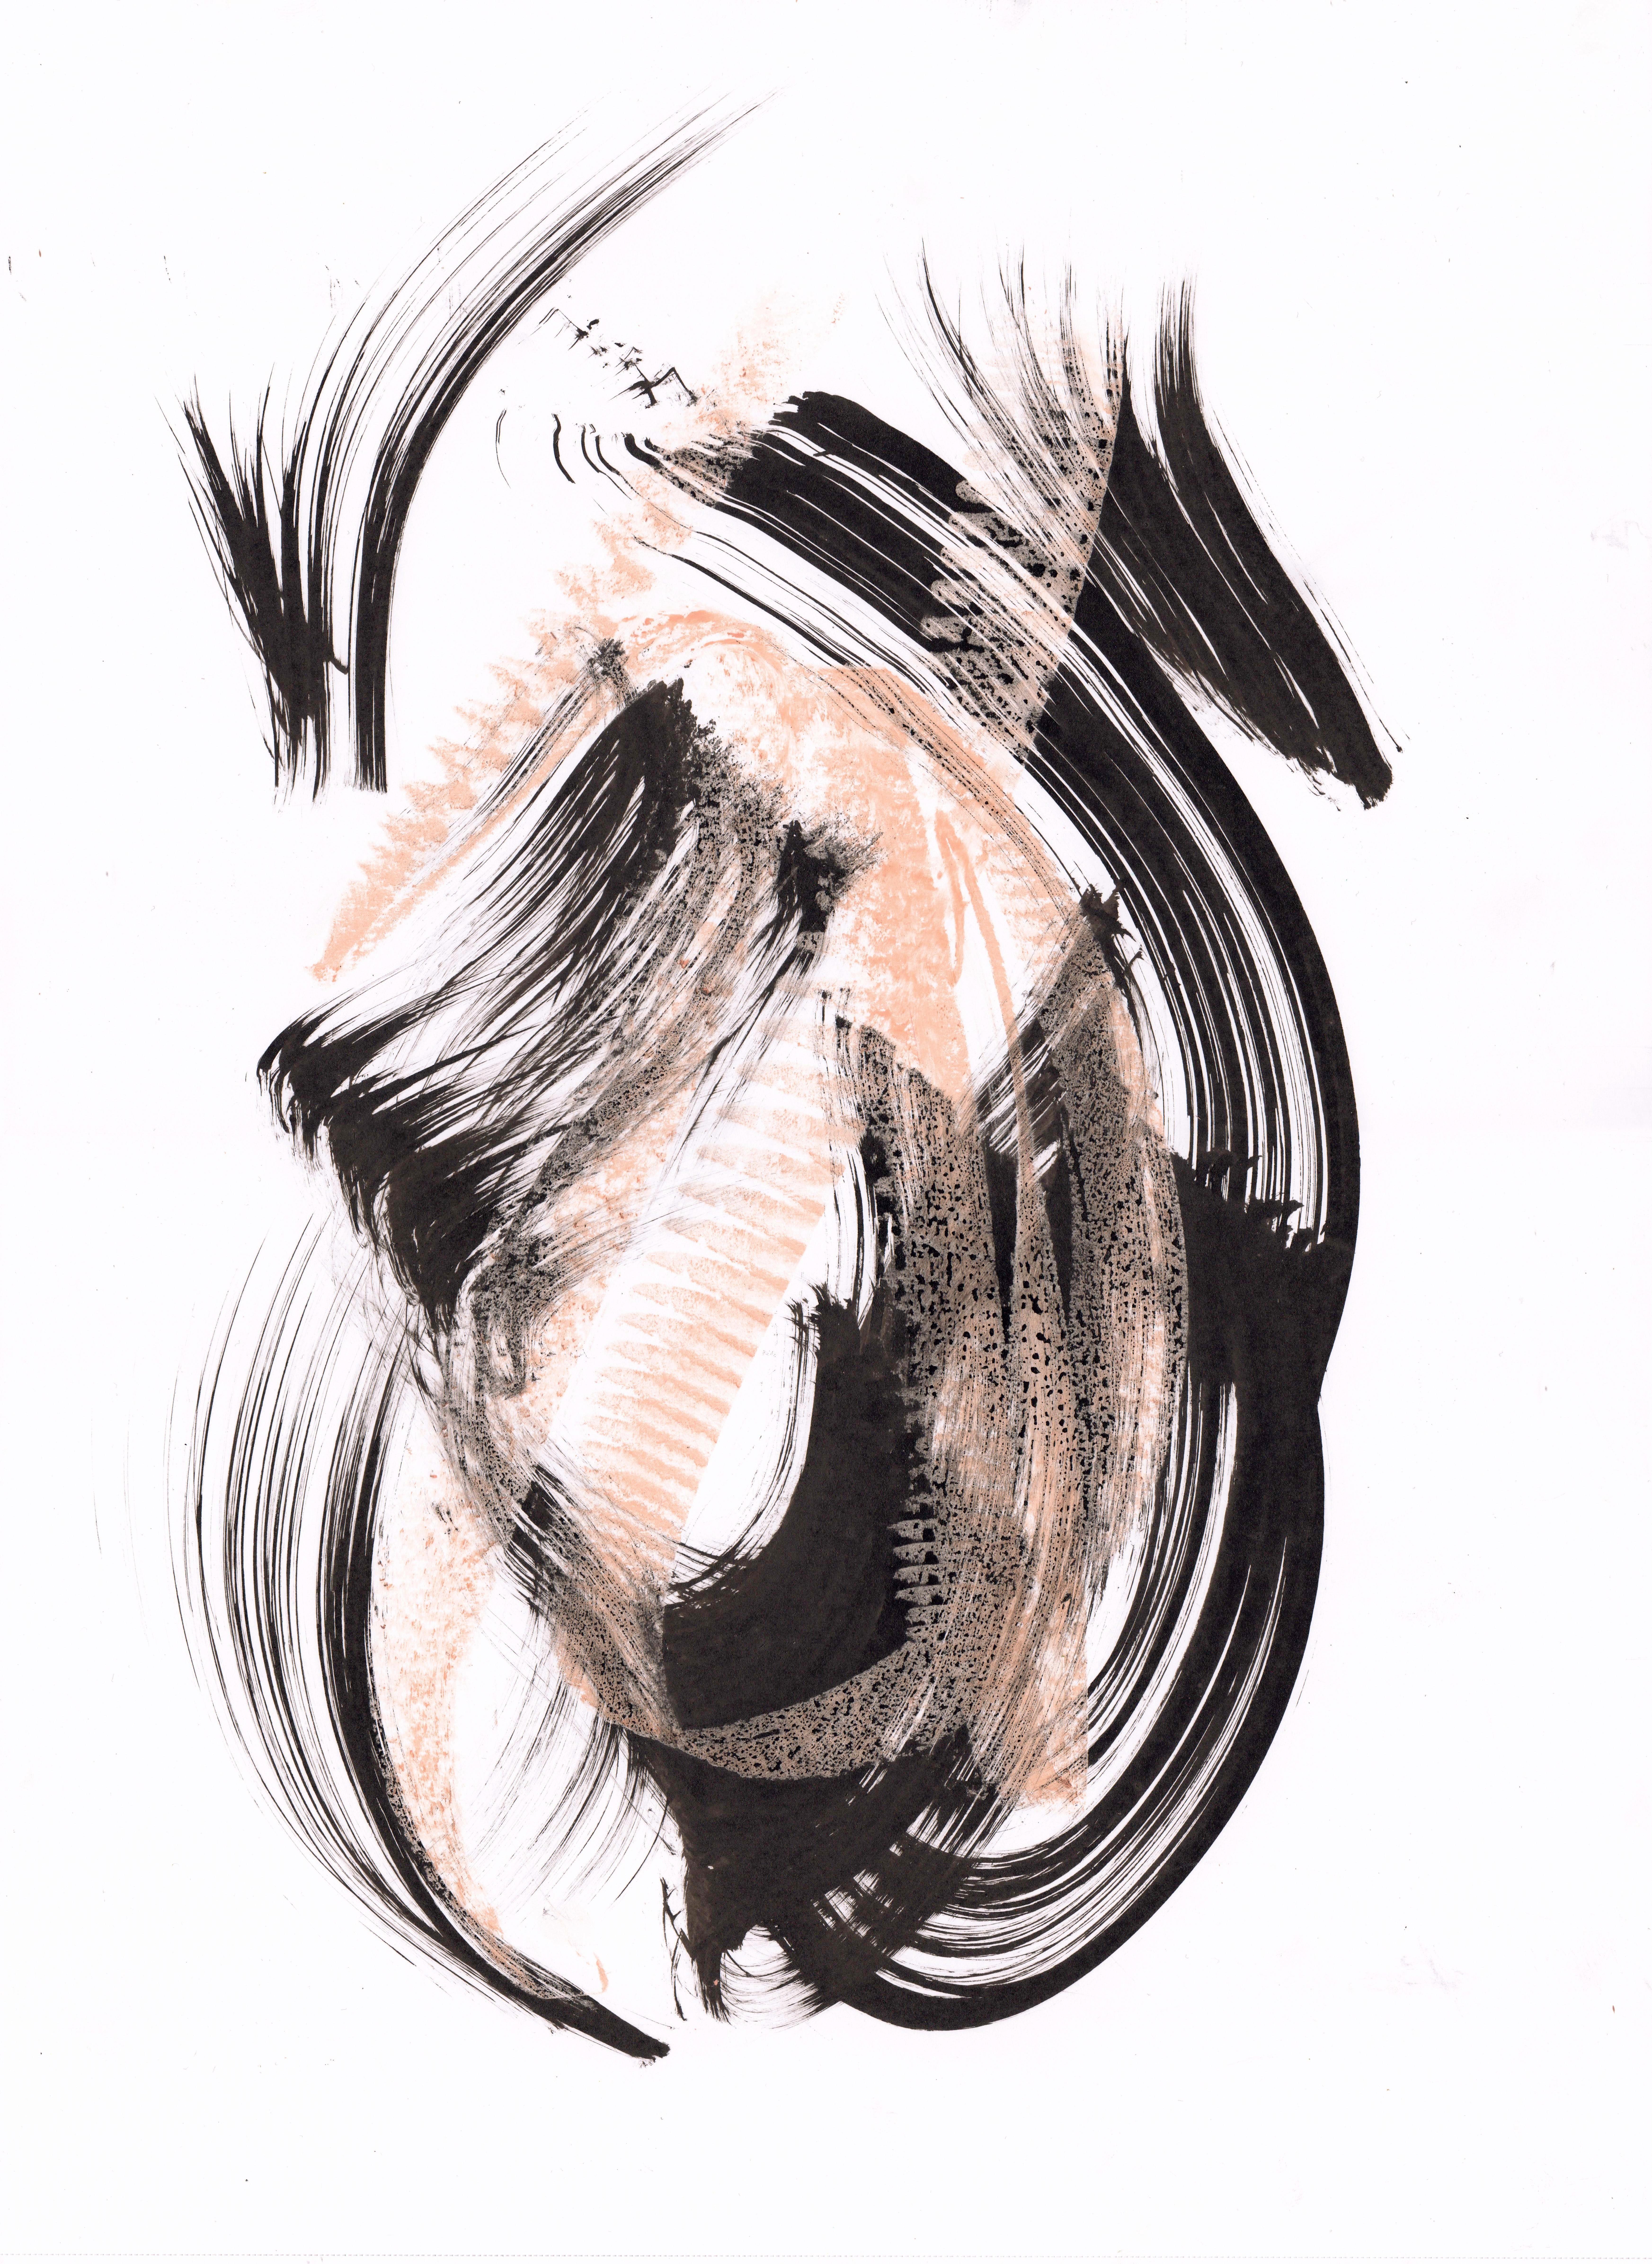 Сalligraphic Abstract Drawing. Flying Brush